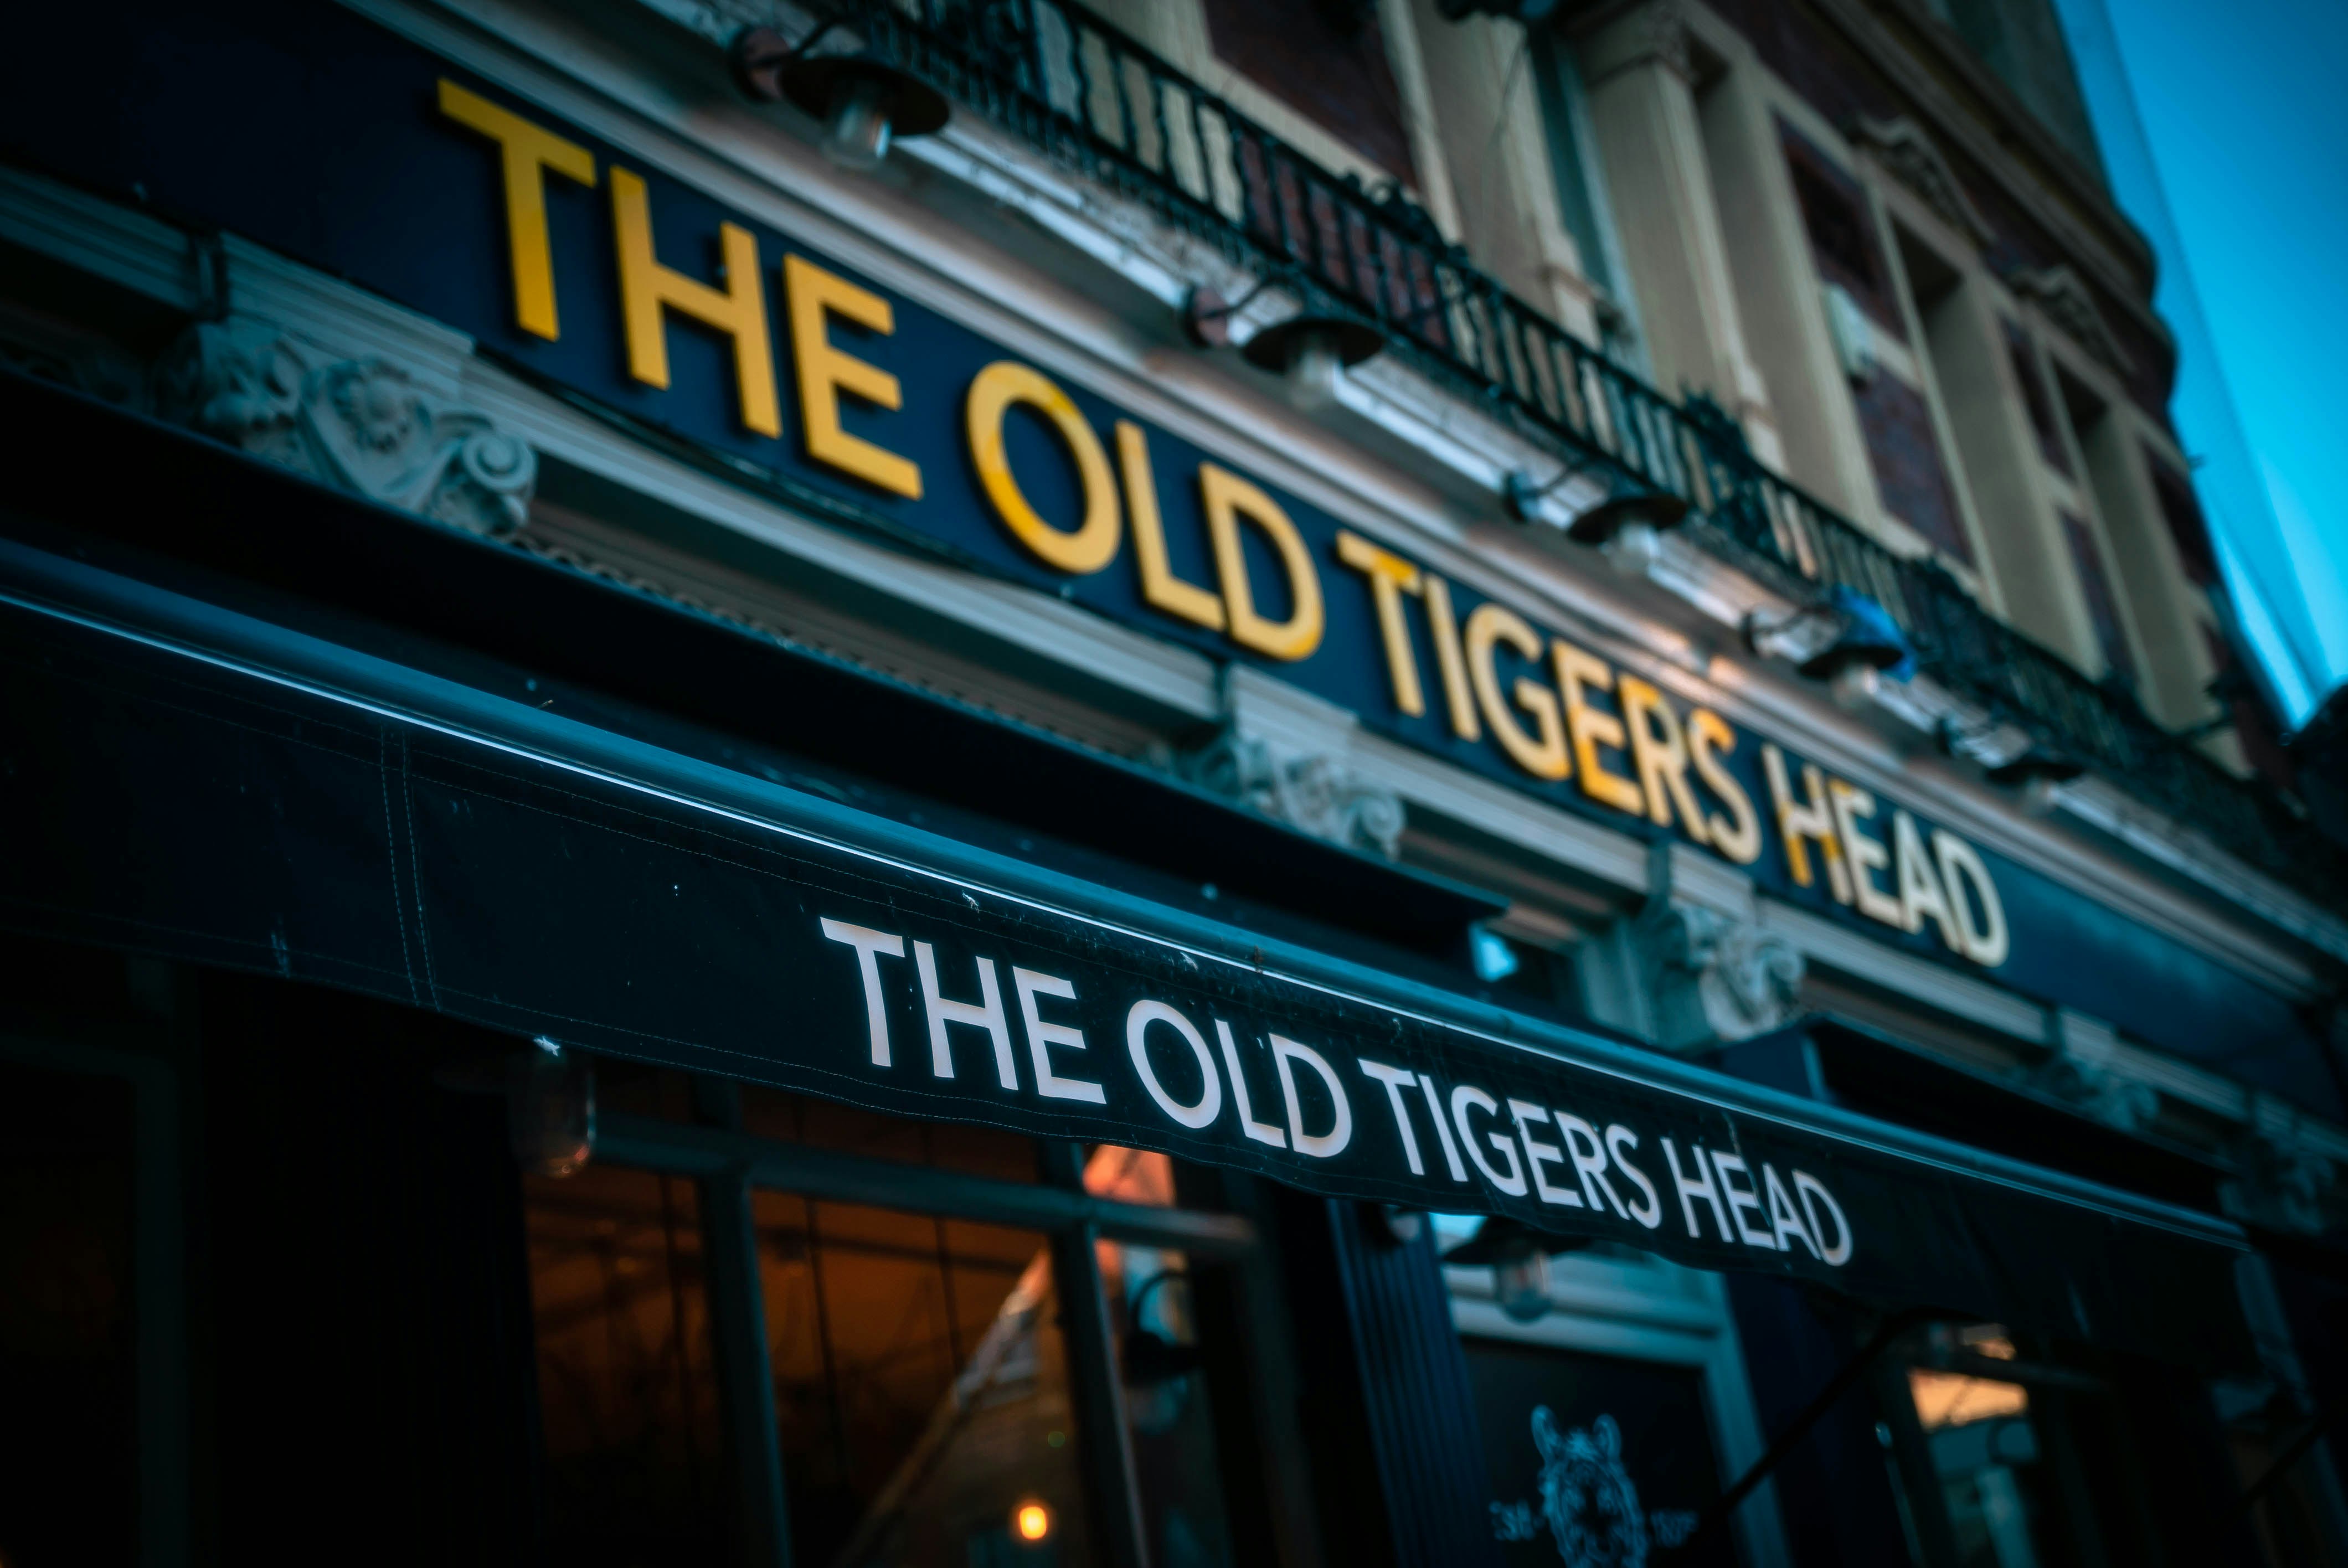 The Old Tigers Head  - Function Room image 2